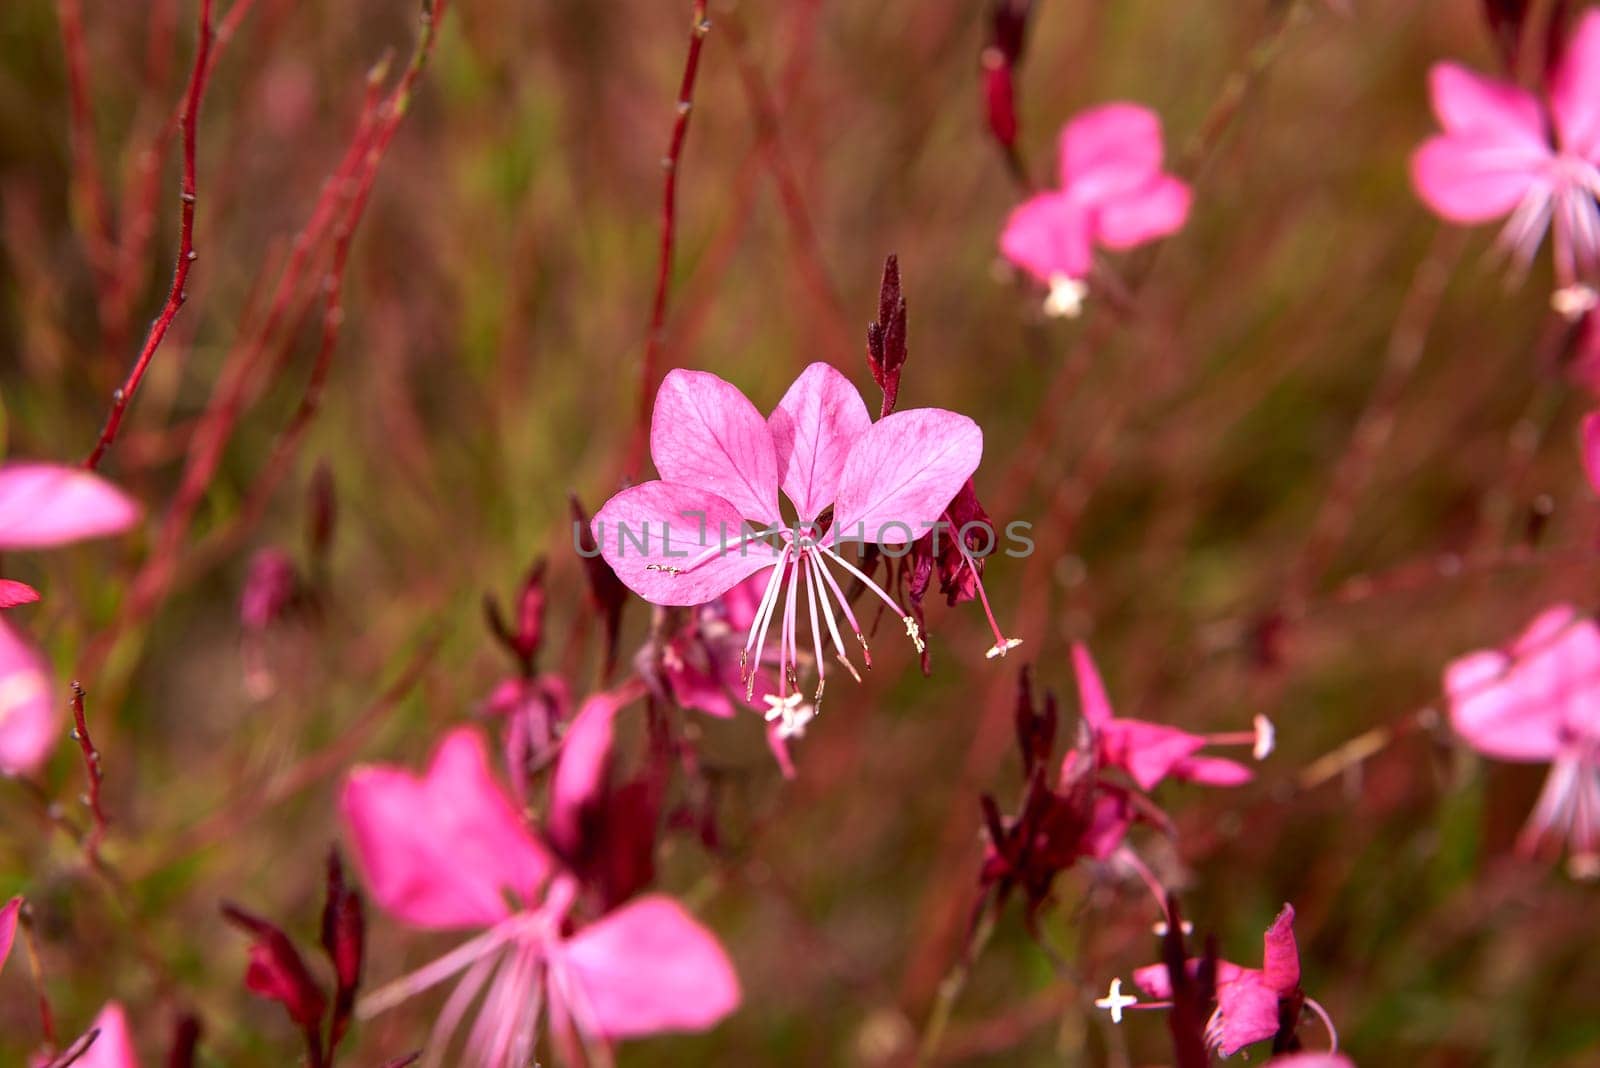 Group of Gaura estrellira flowers in the bush, out of focus background, and detail by raul_ruiz